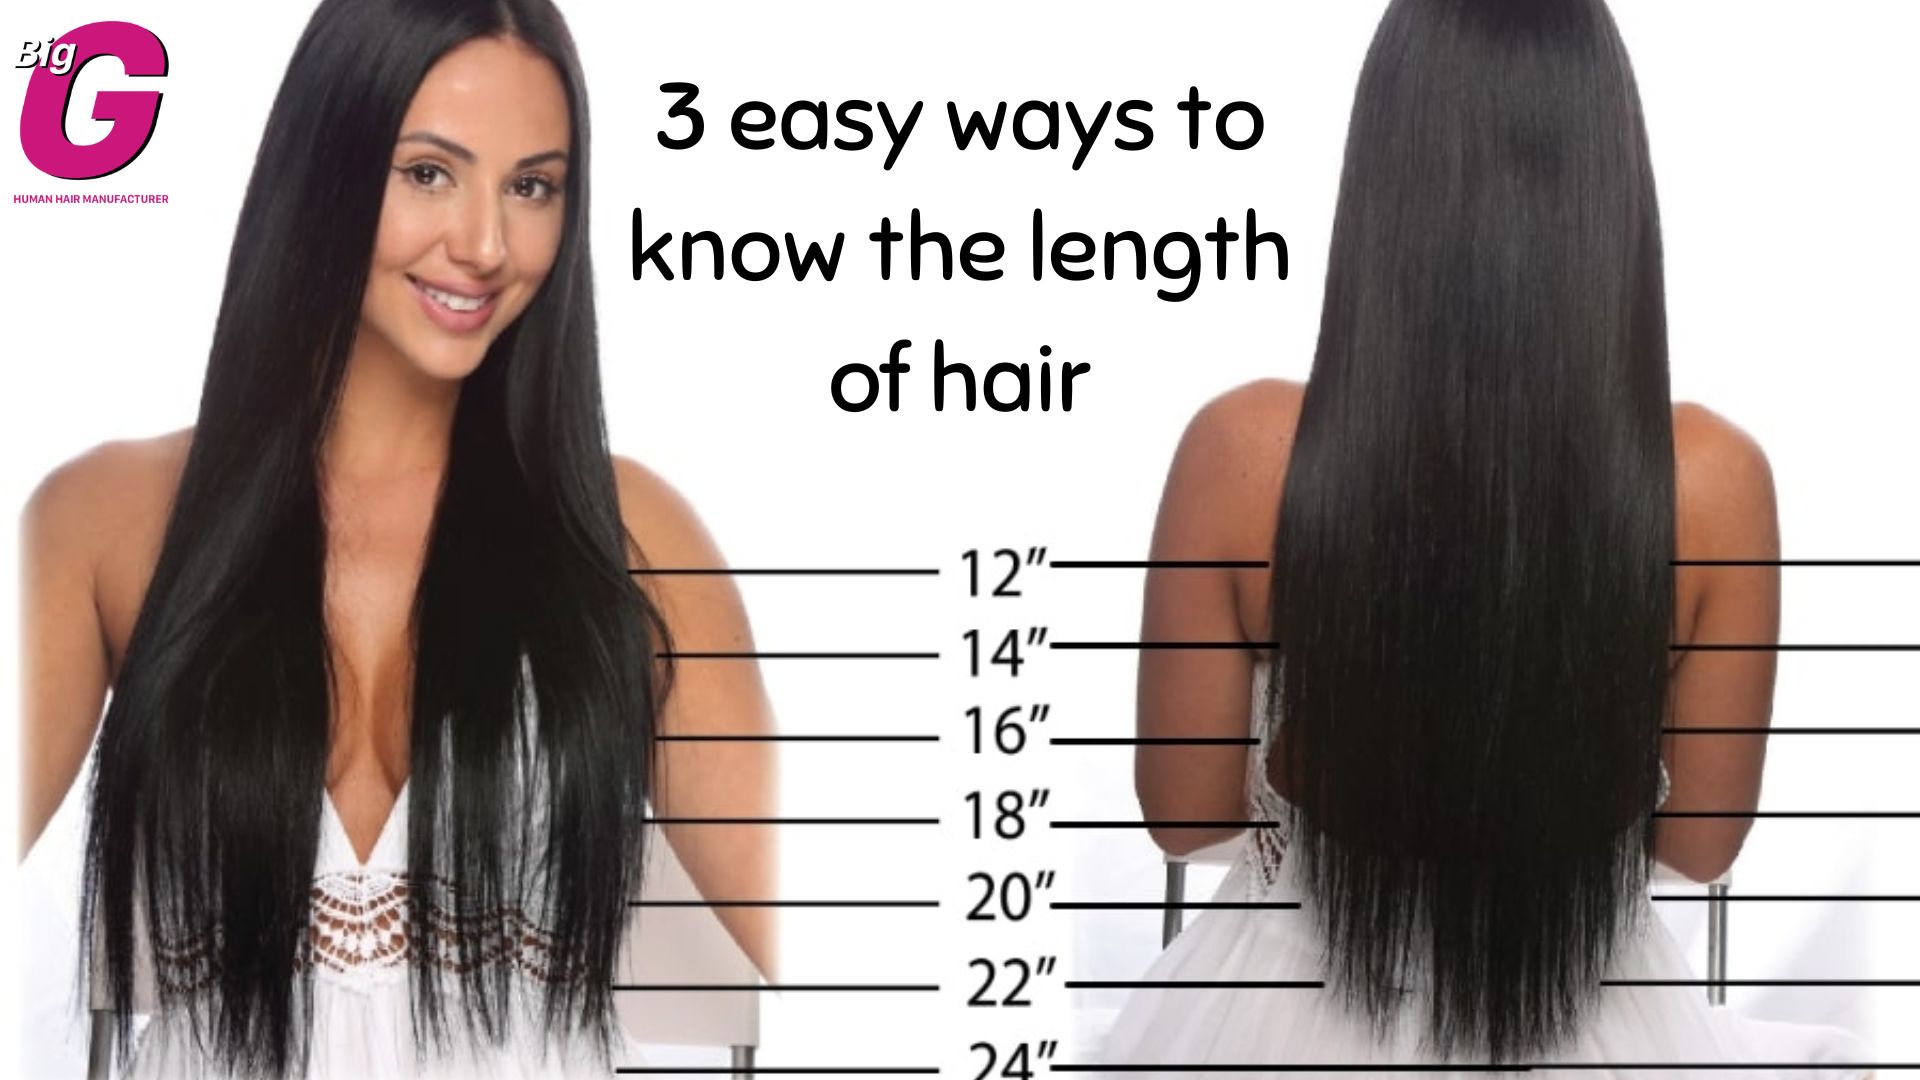 3 easy ways to know the length of hair - BigG Hair Nigeria